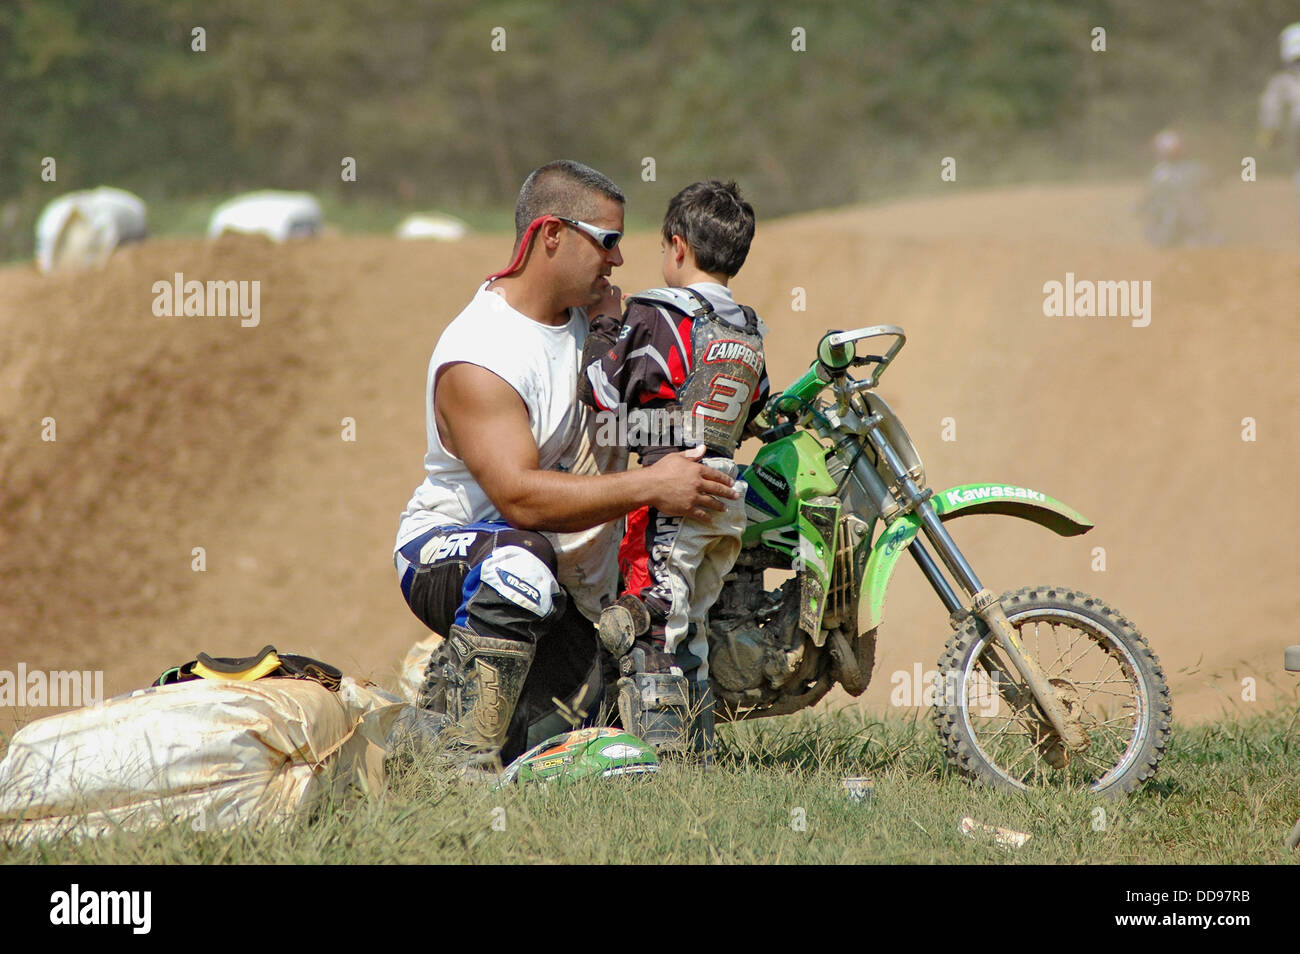 Download Father and son after crash on MX cycle dirk race track ...